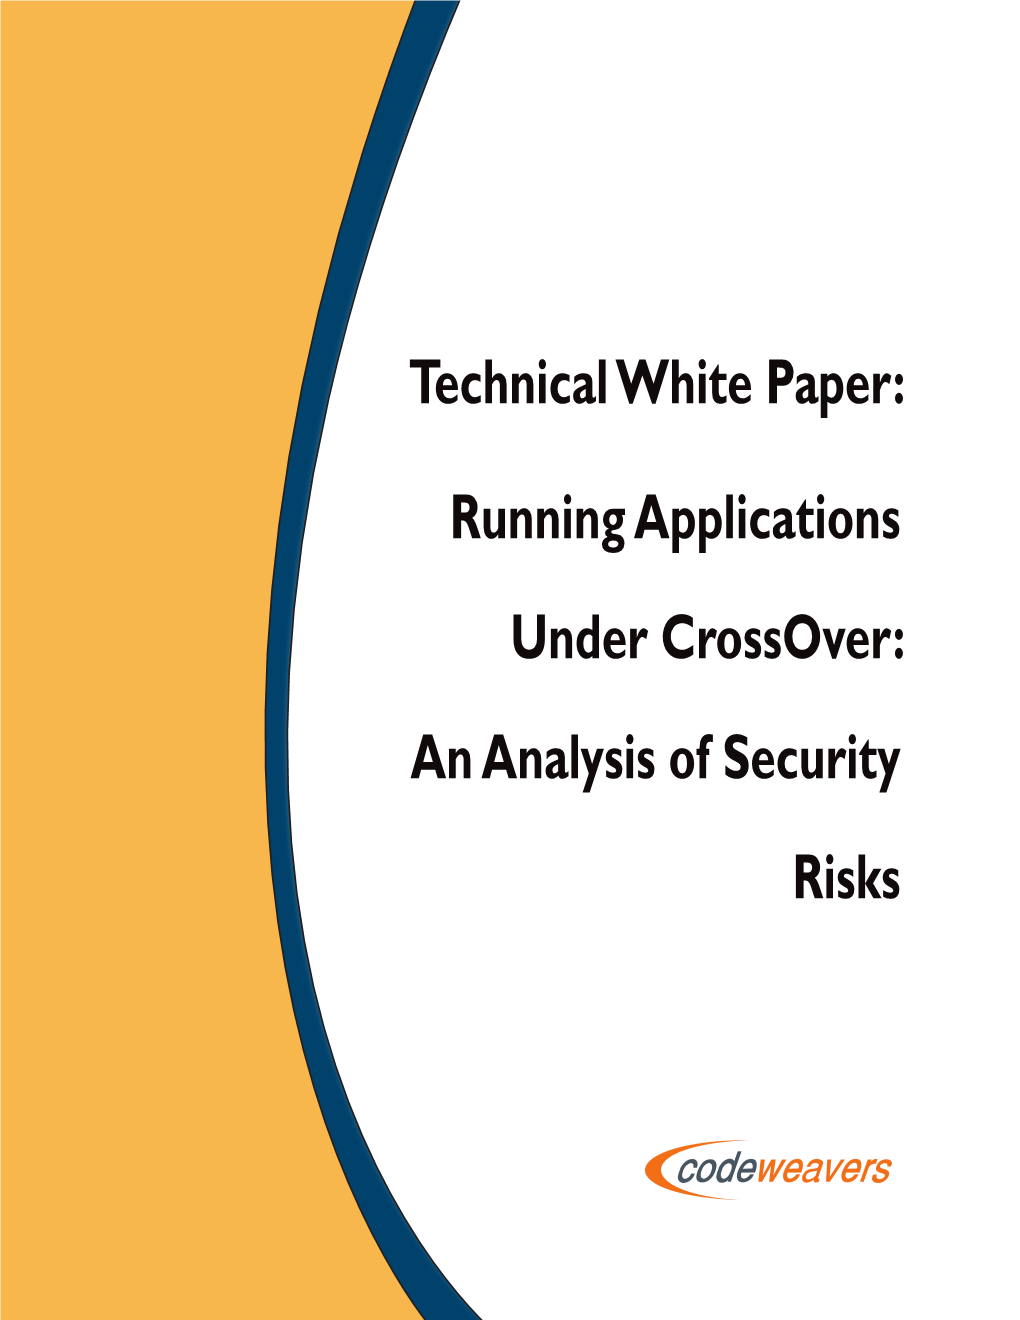 Technical White Paper: Running Applications Under